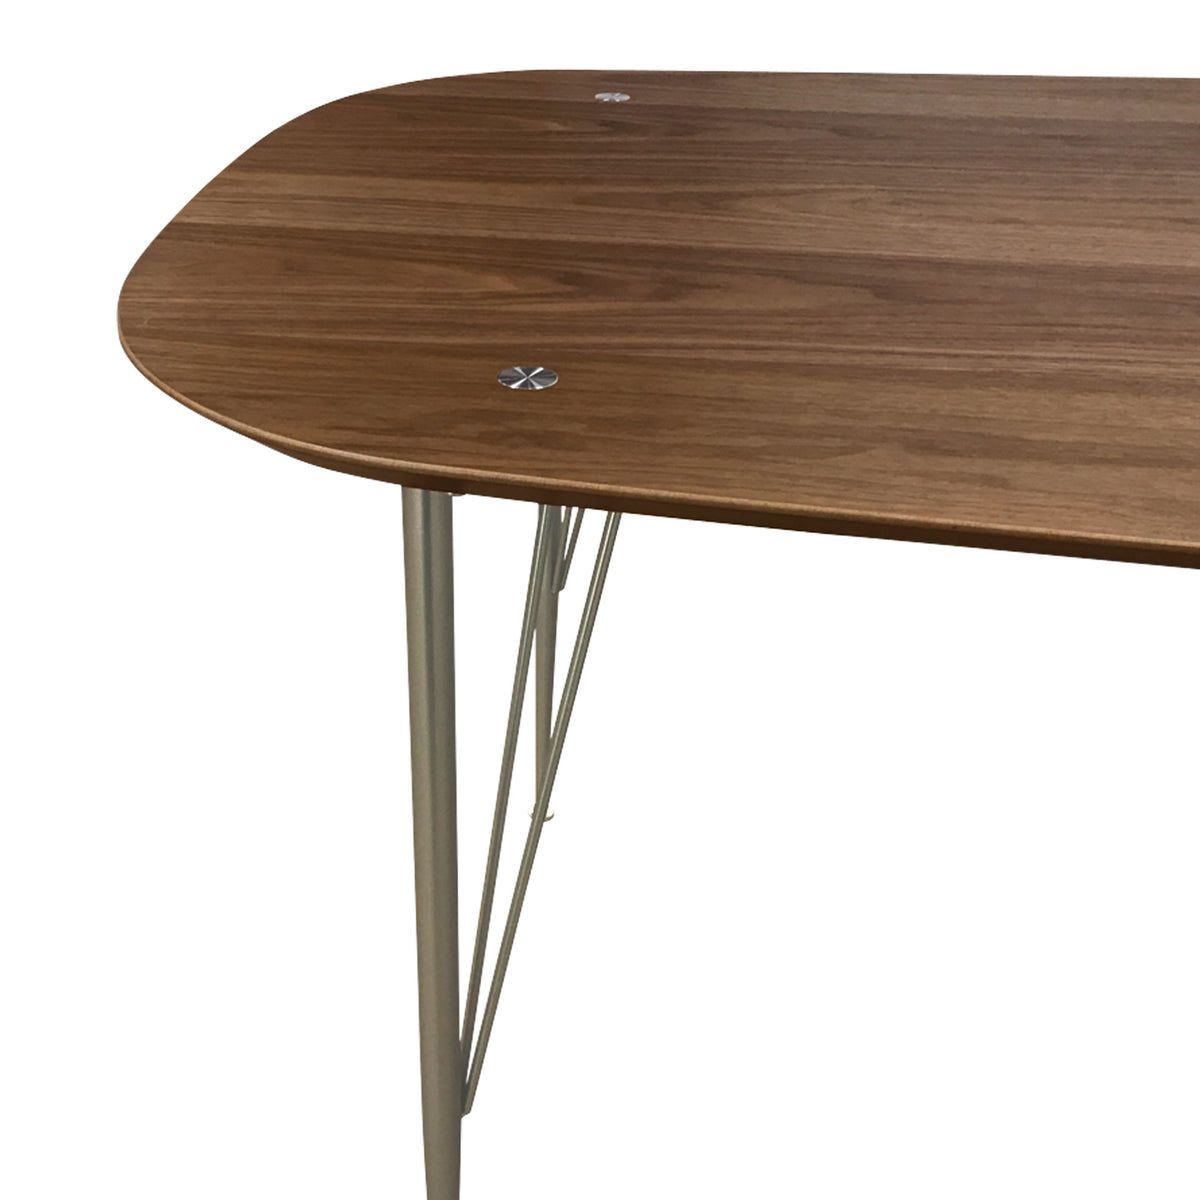 Zimano Walnut Dining Table With Silver Legs - 180cm - Notbrand